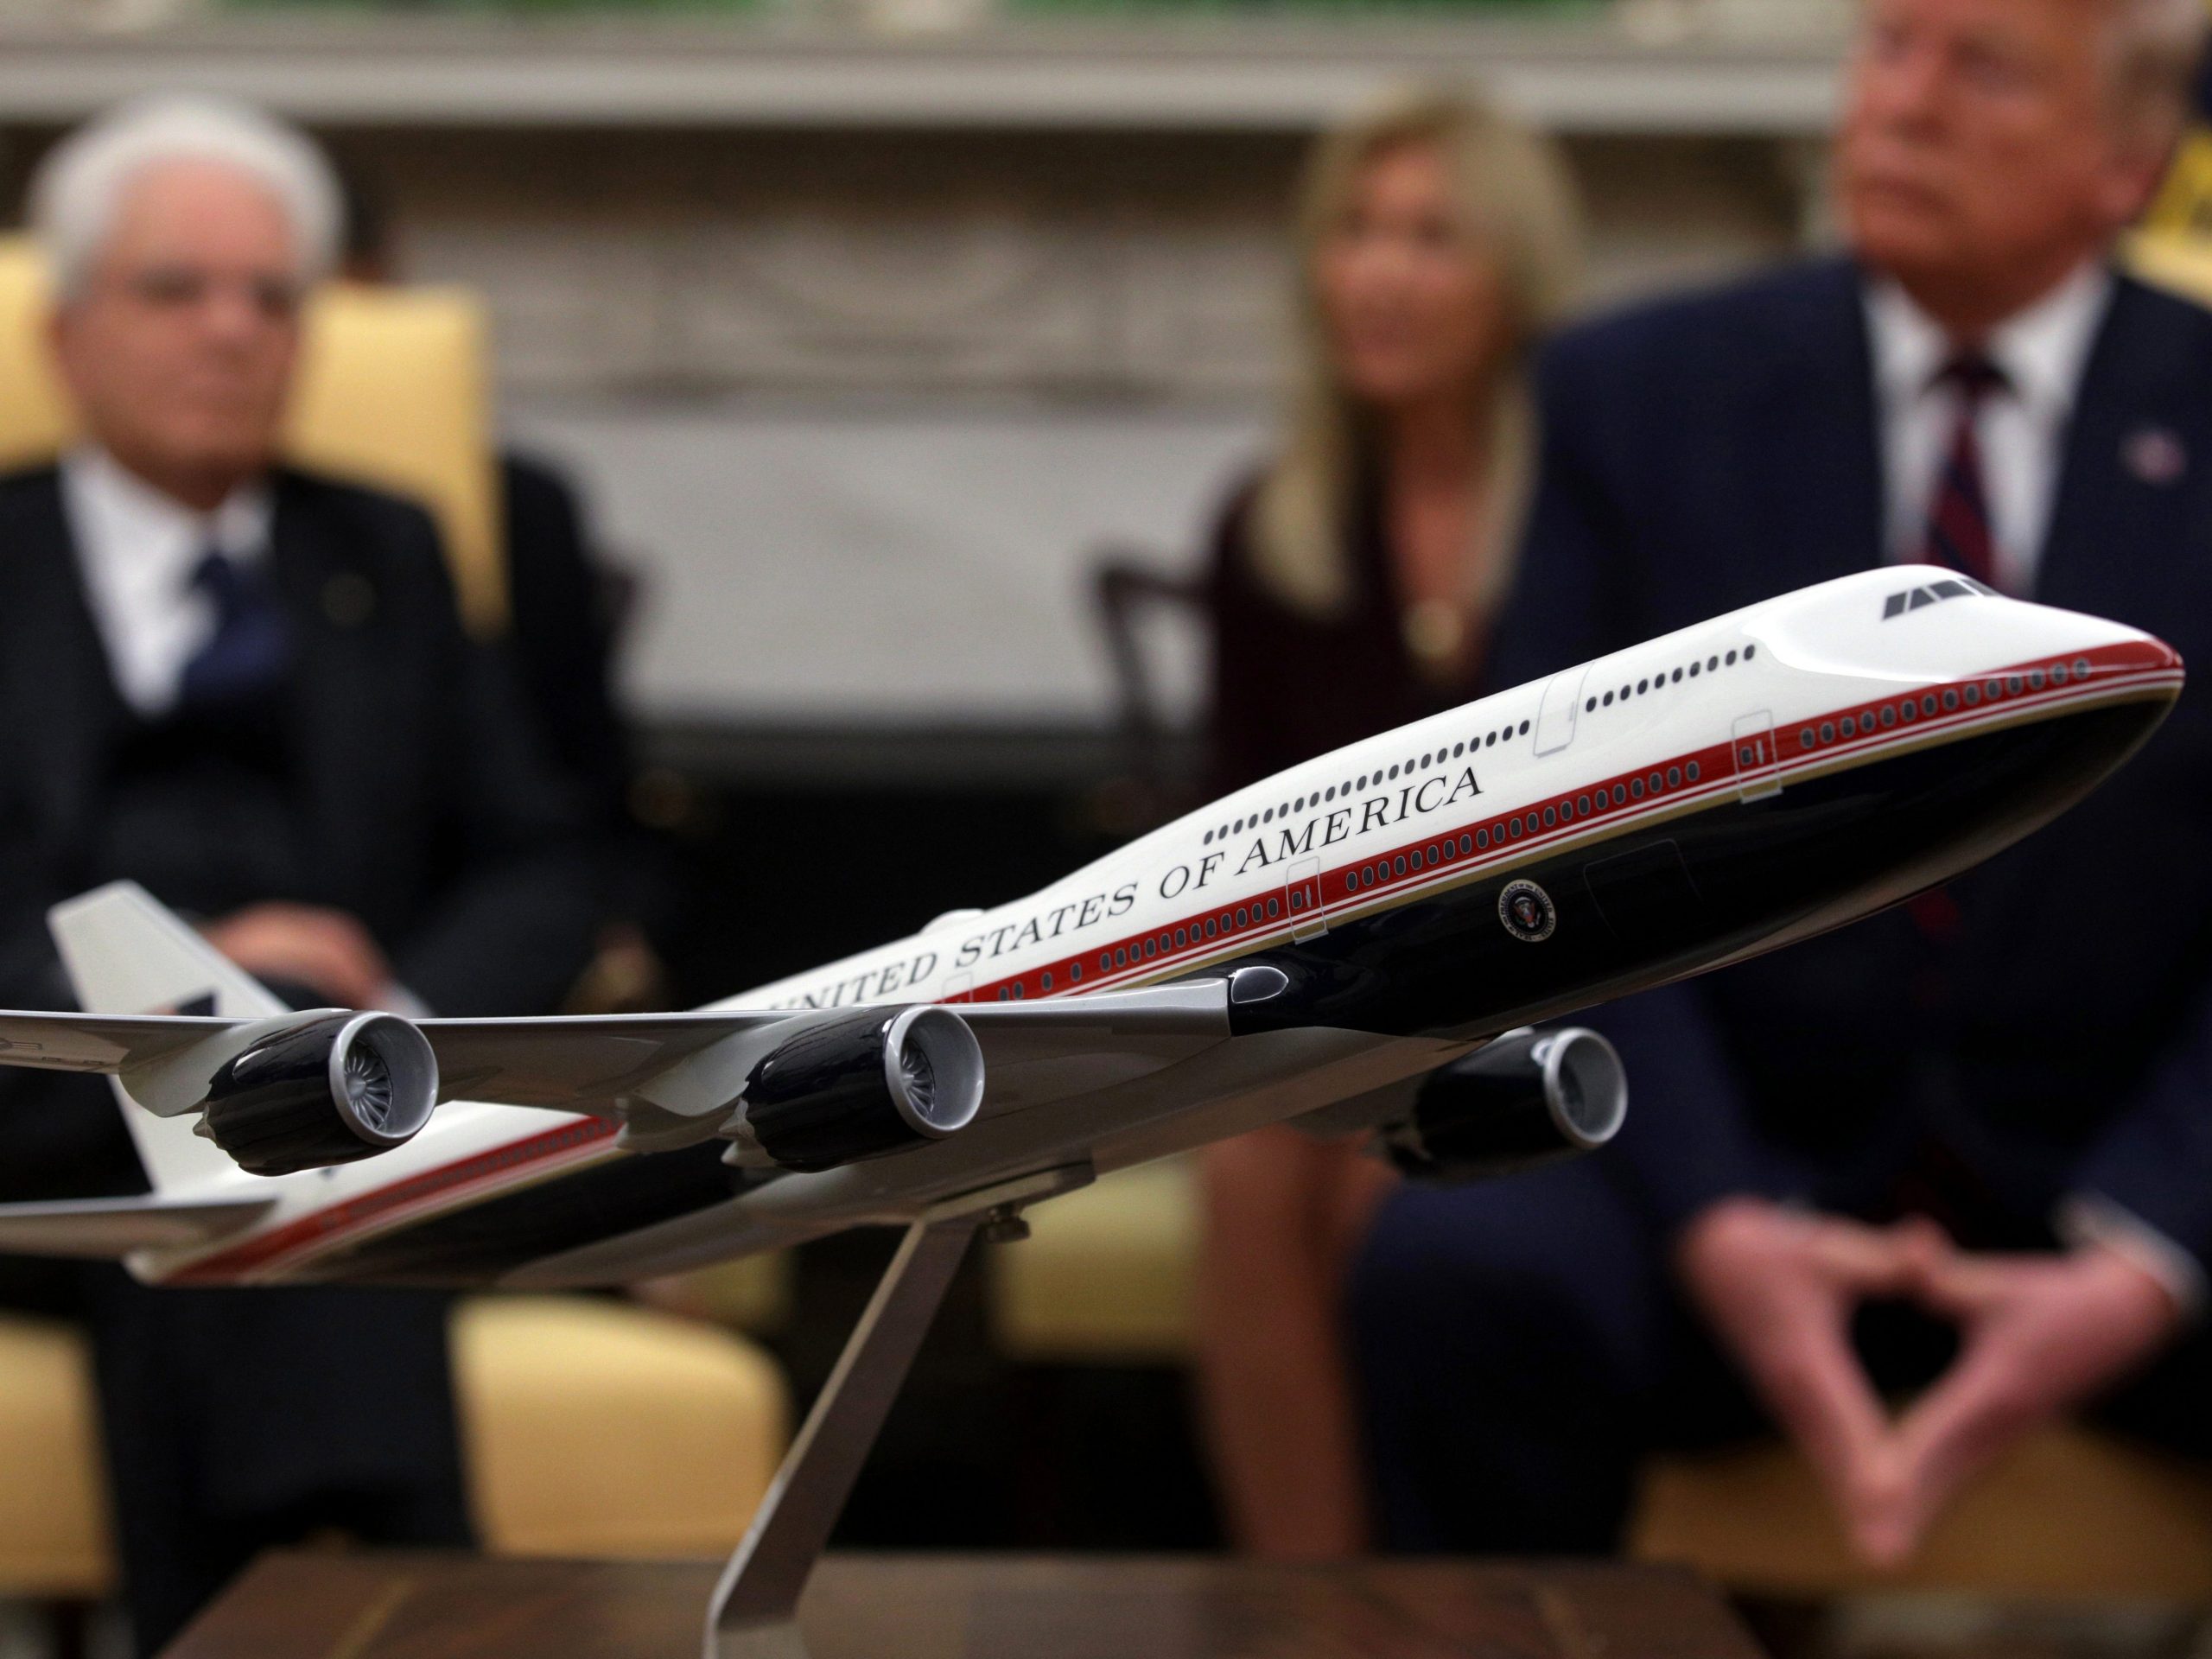 New Air Force One Model at the White House